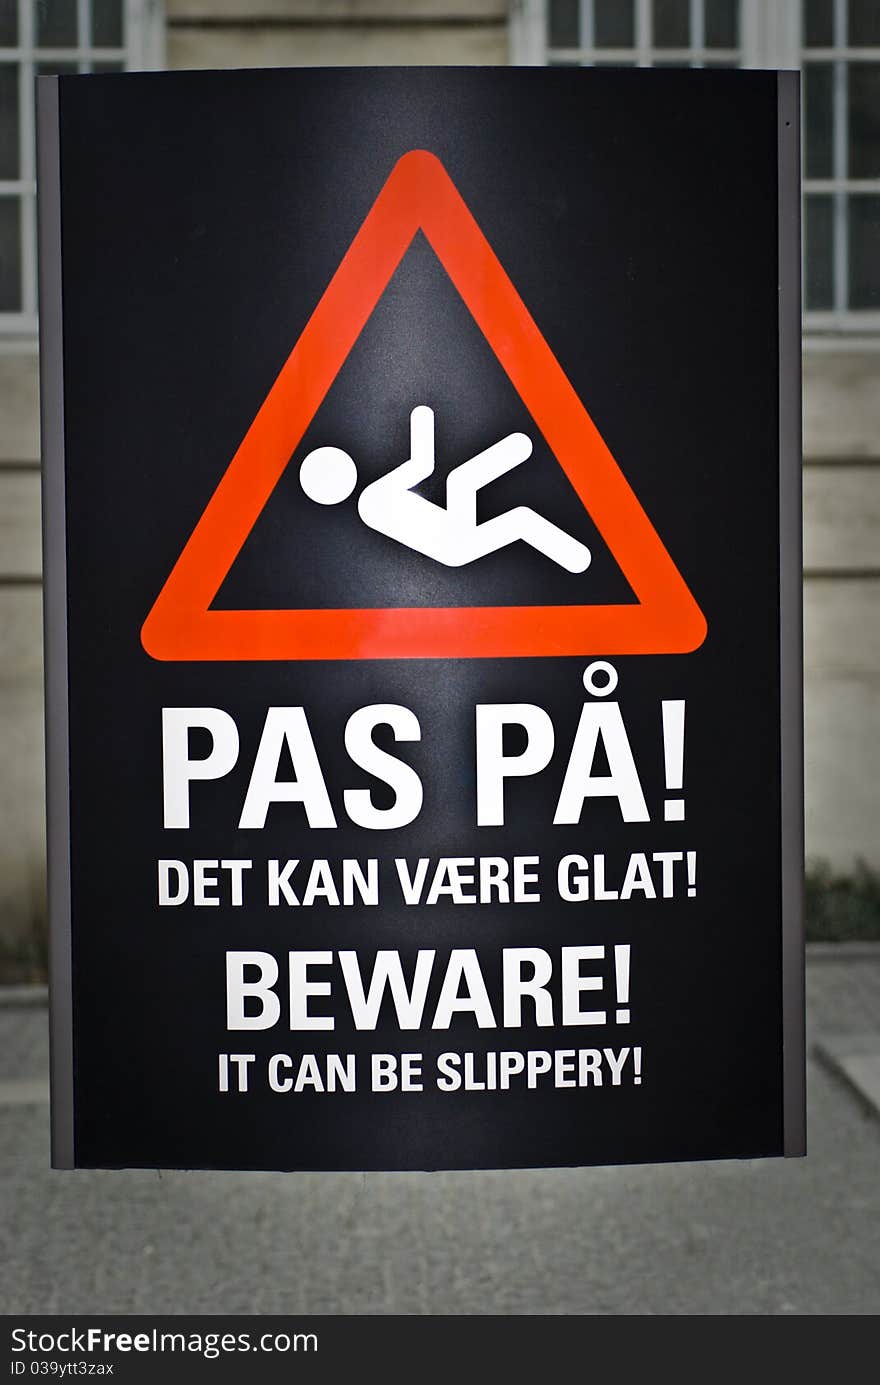 Beware sign. It can be slippery outside on the street. Sign from Denmark.